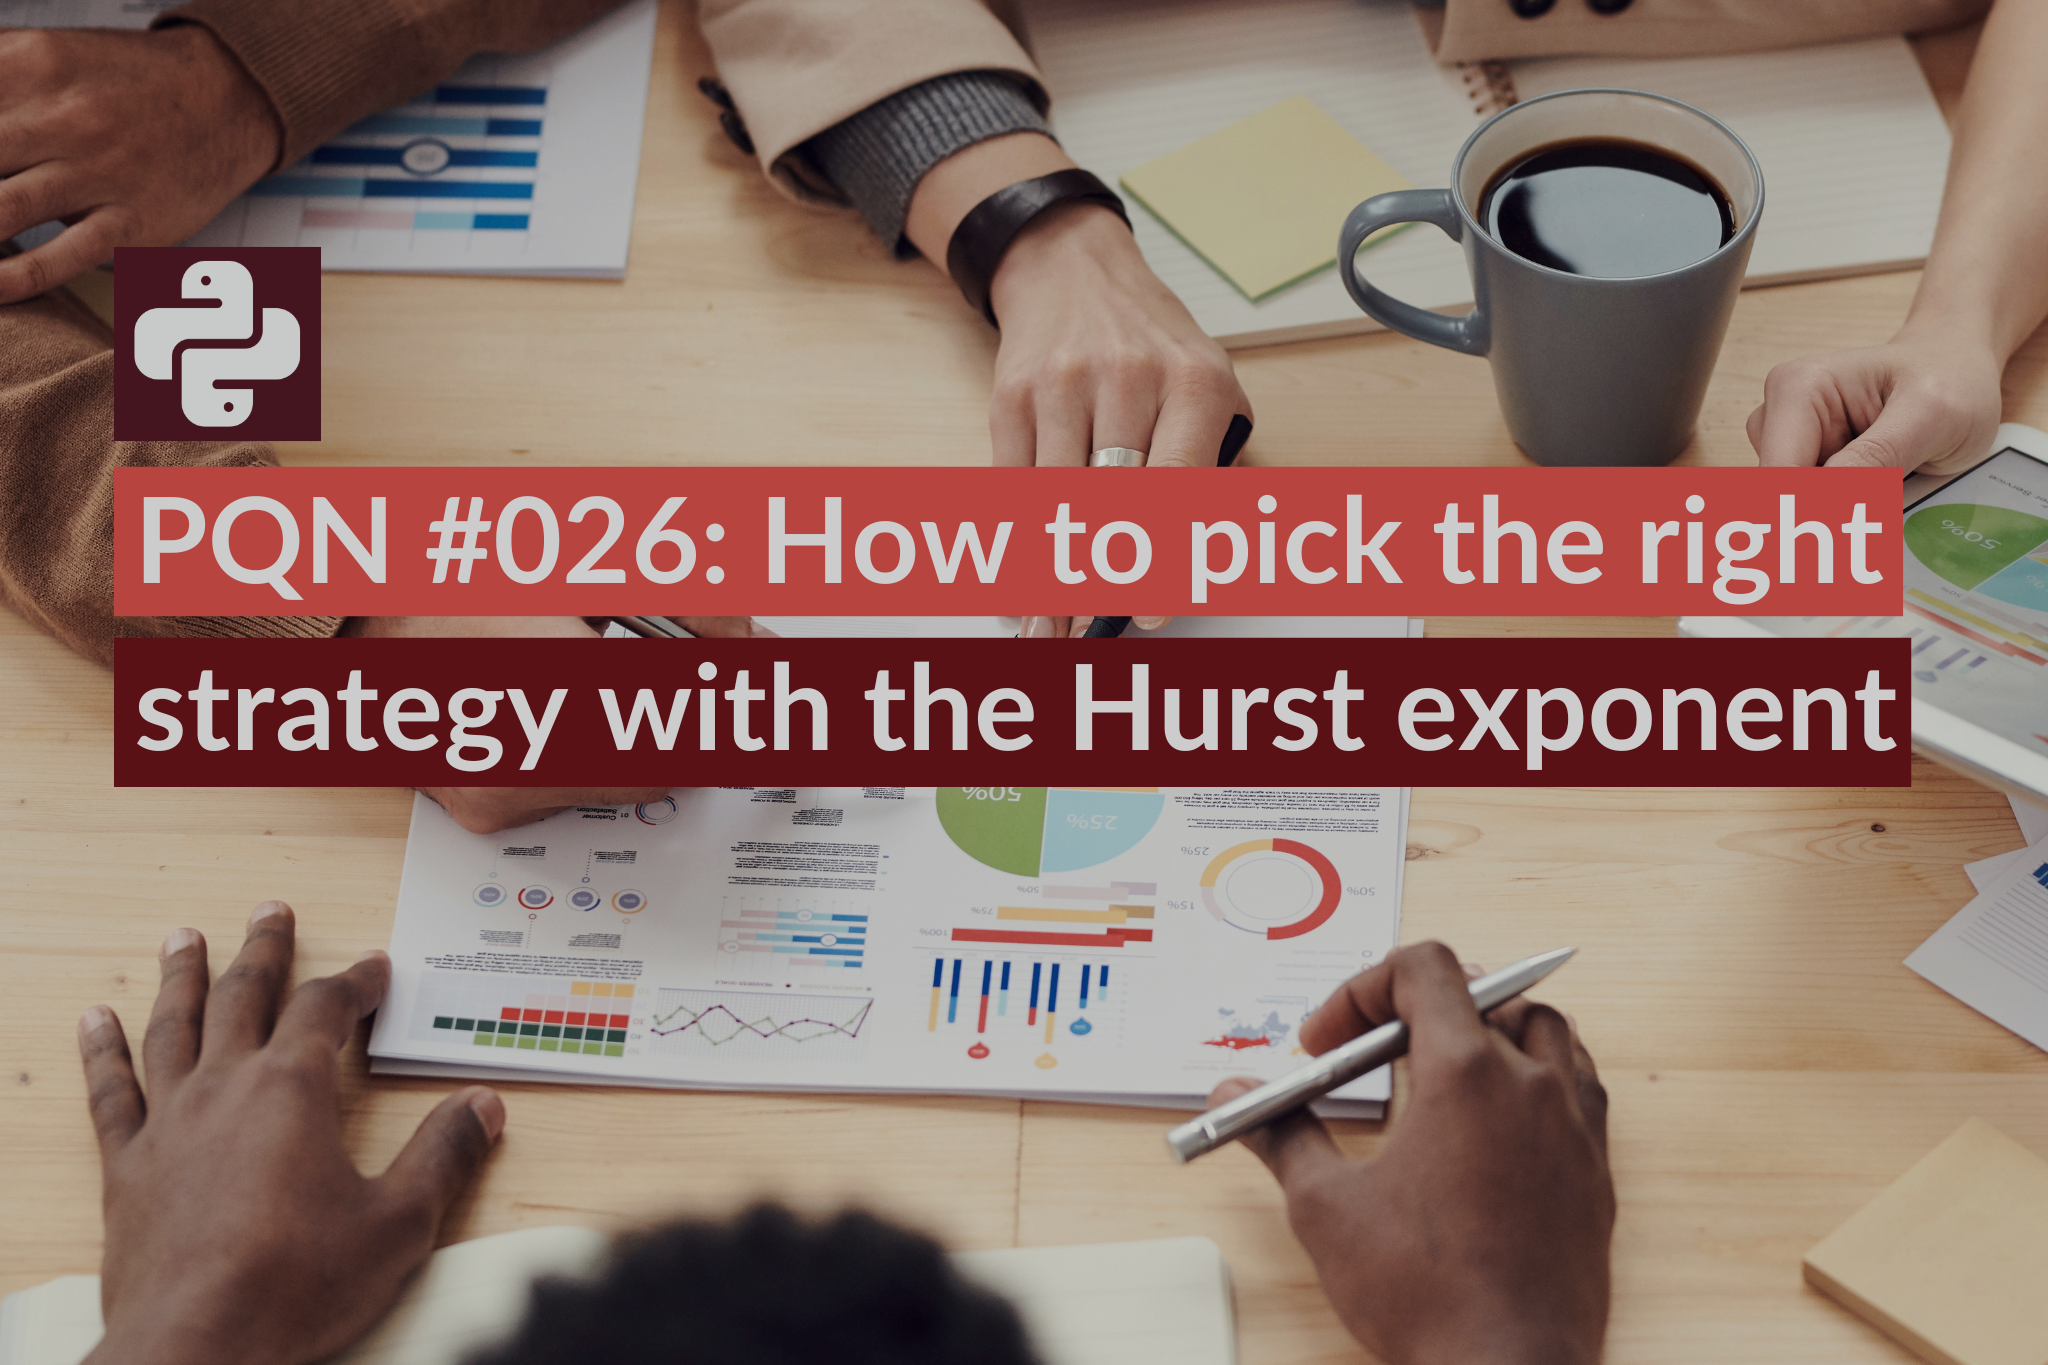 PQN #026: How to pick the right strategy with the Hurst exponent